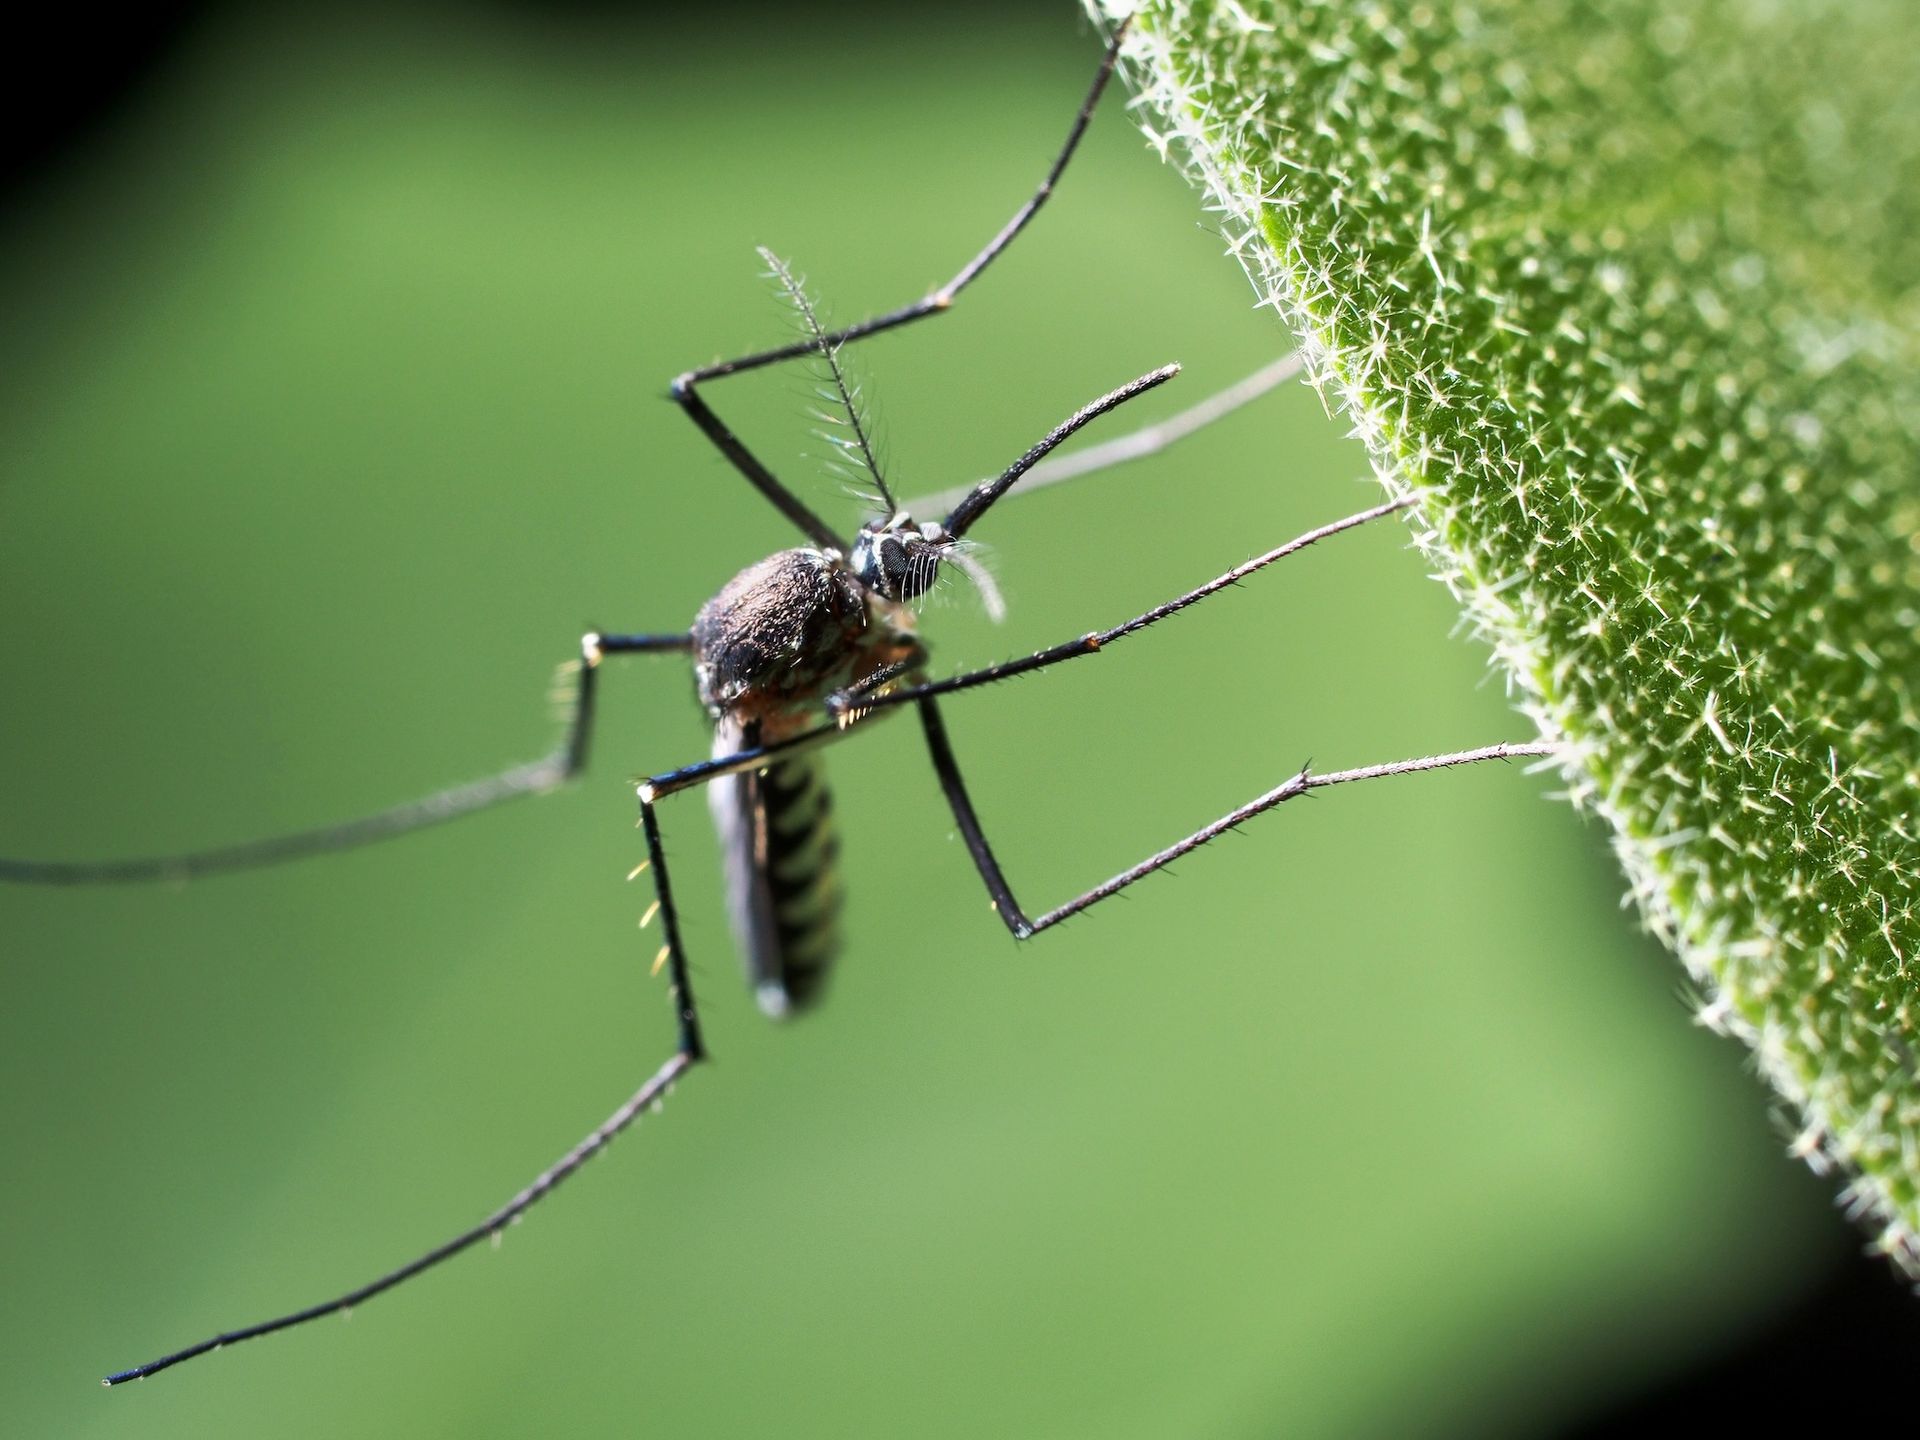 a close up of a mosquito on a green leaf .